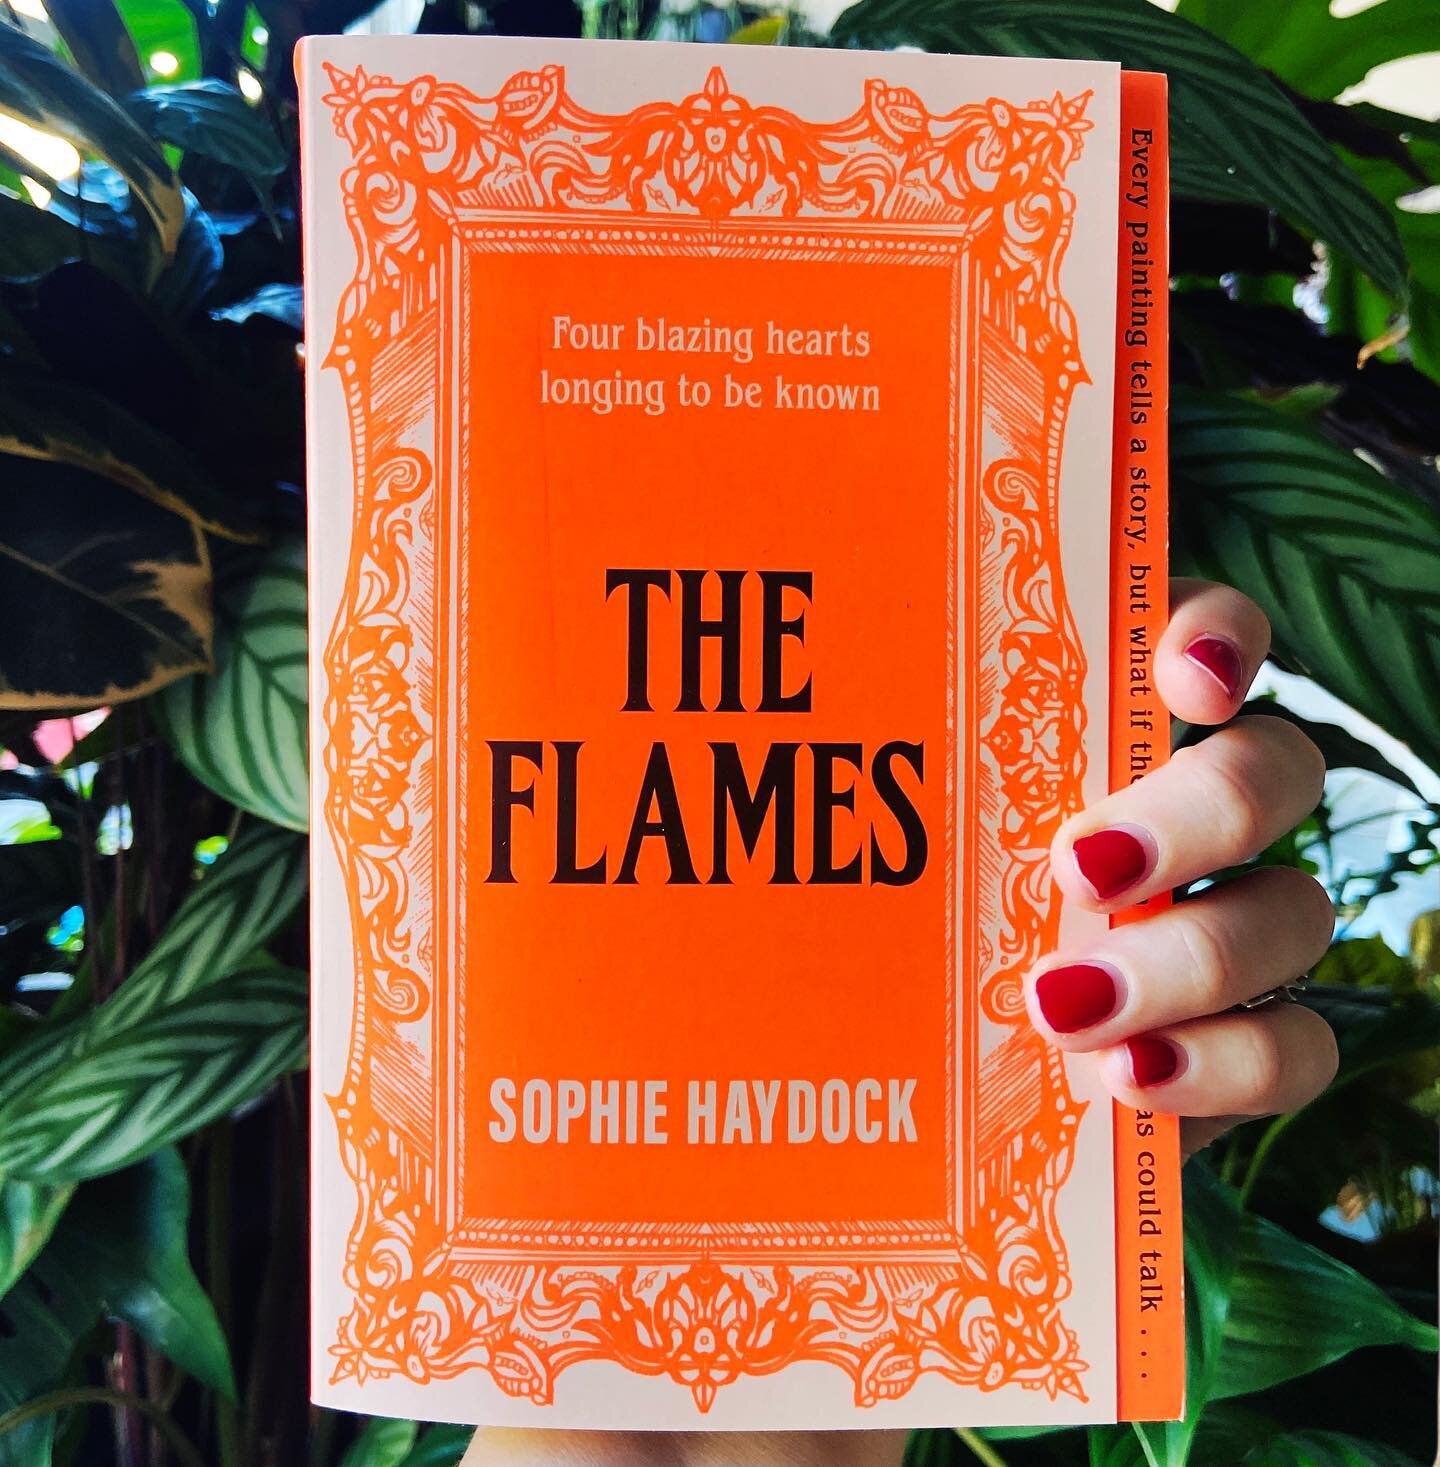 Every painting tells a story, but what if the women on the canvas could talk&hellip; 

This is the tagline for my debut The Flames, and pictured here is the bold and brilliant cover (design by @becikelly) for the advance proofs, which are being sent 